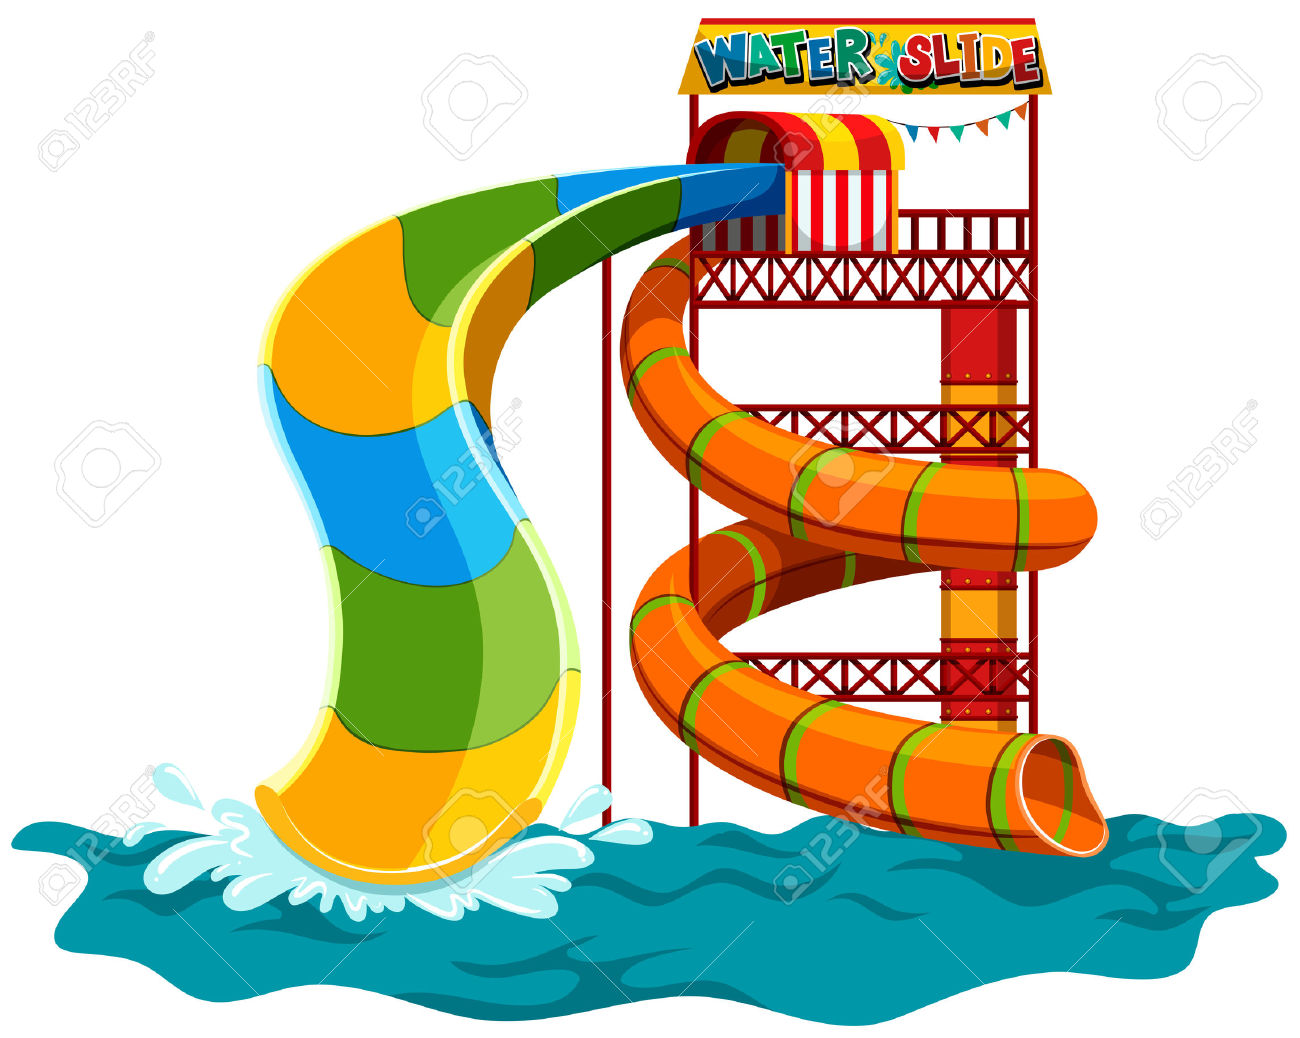 Water fight slide clipart.